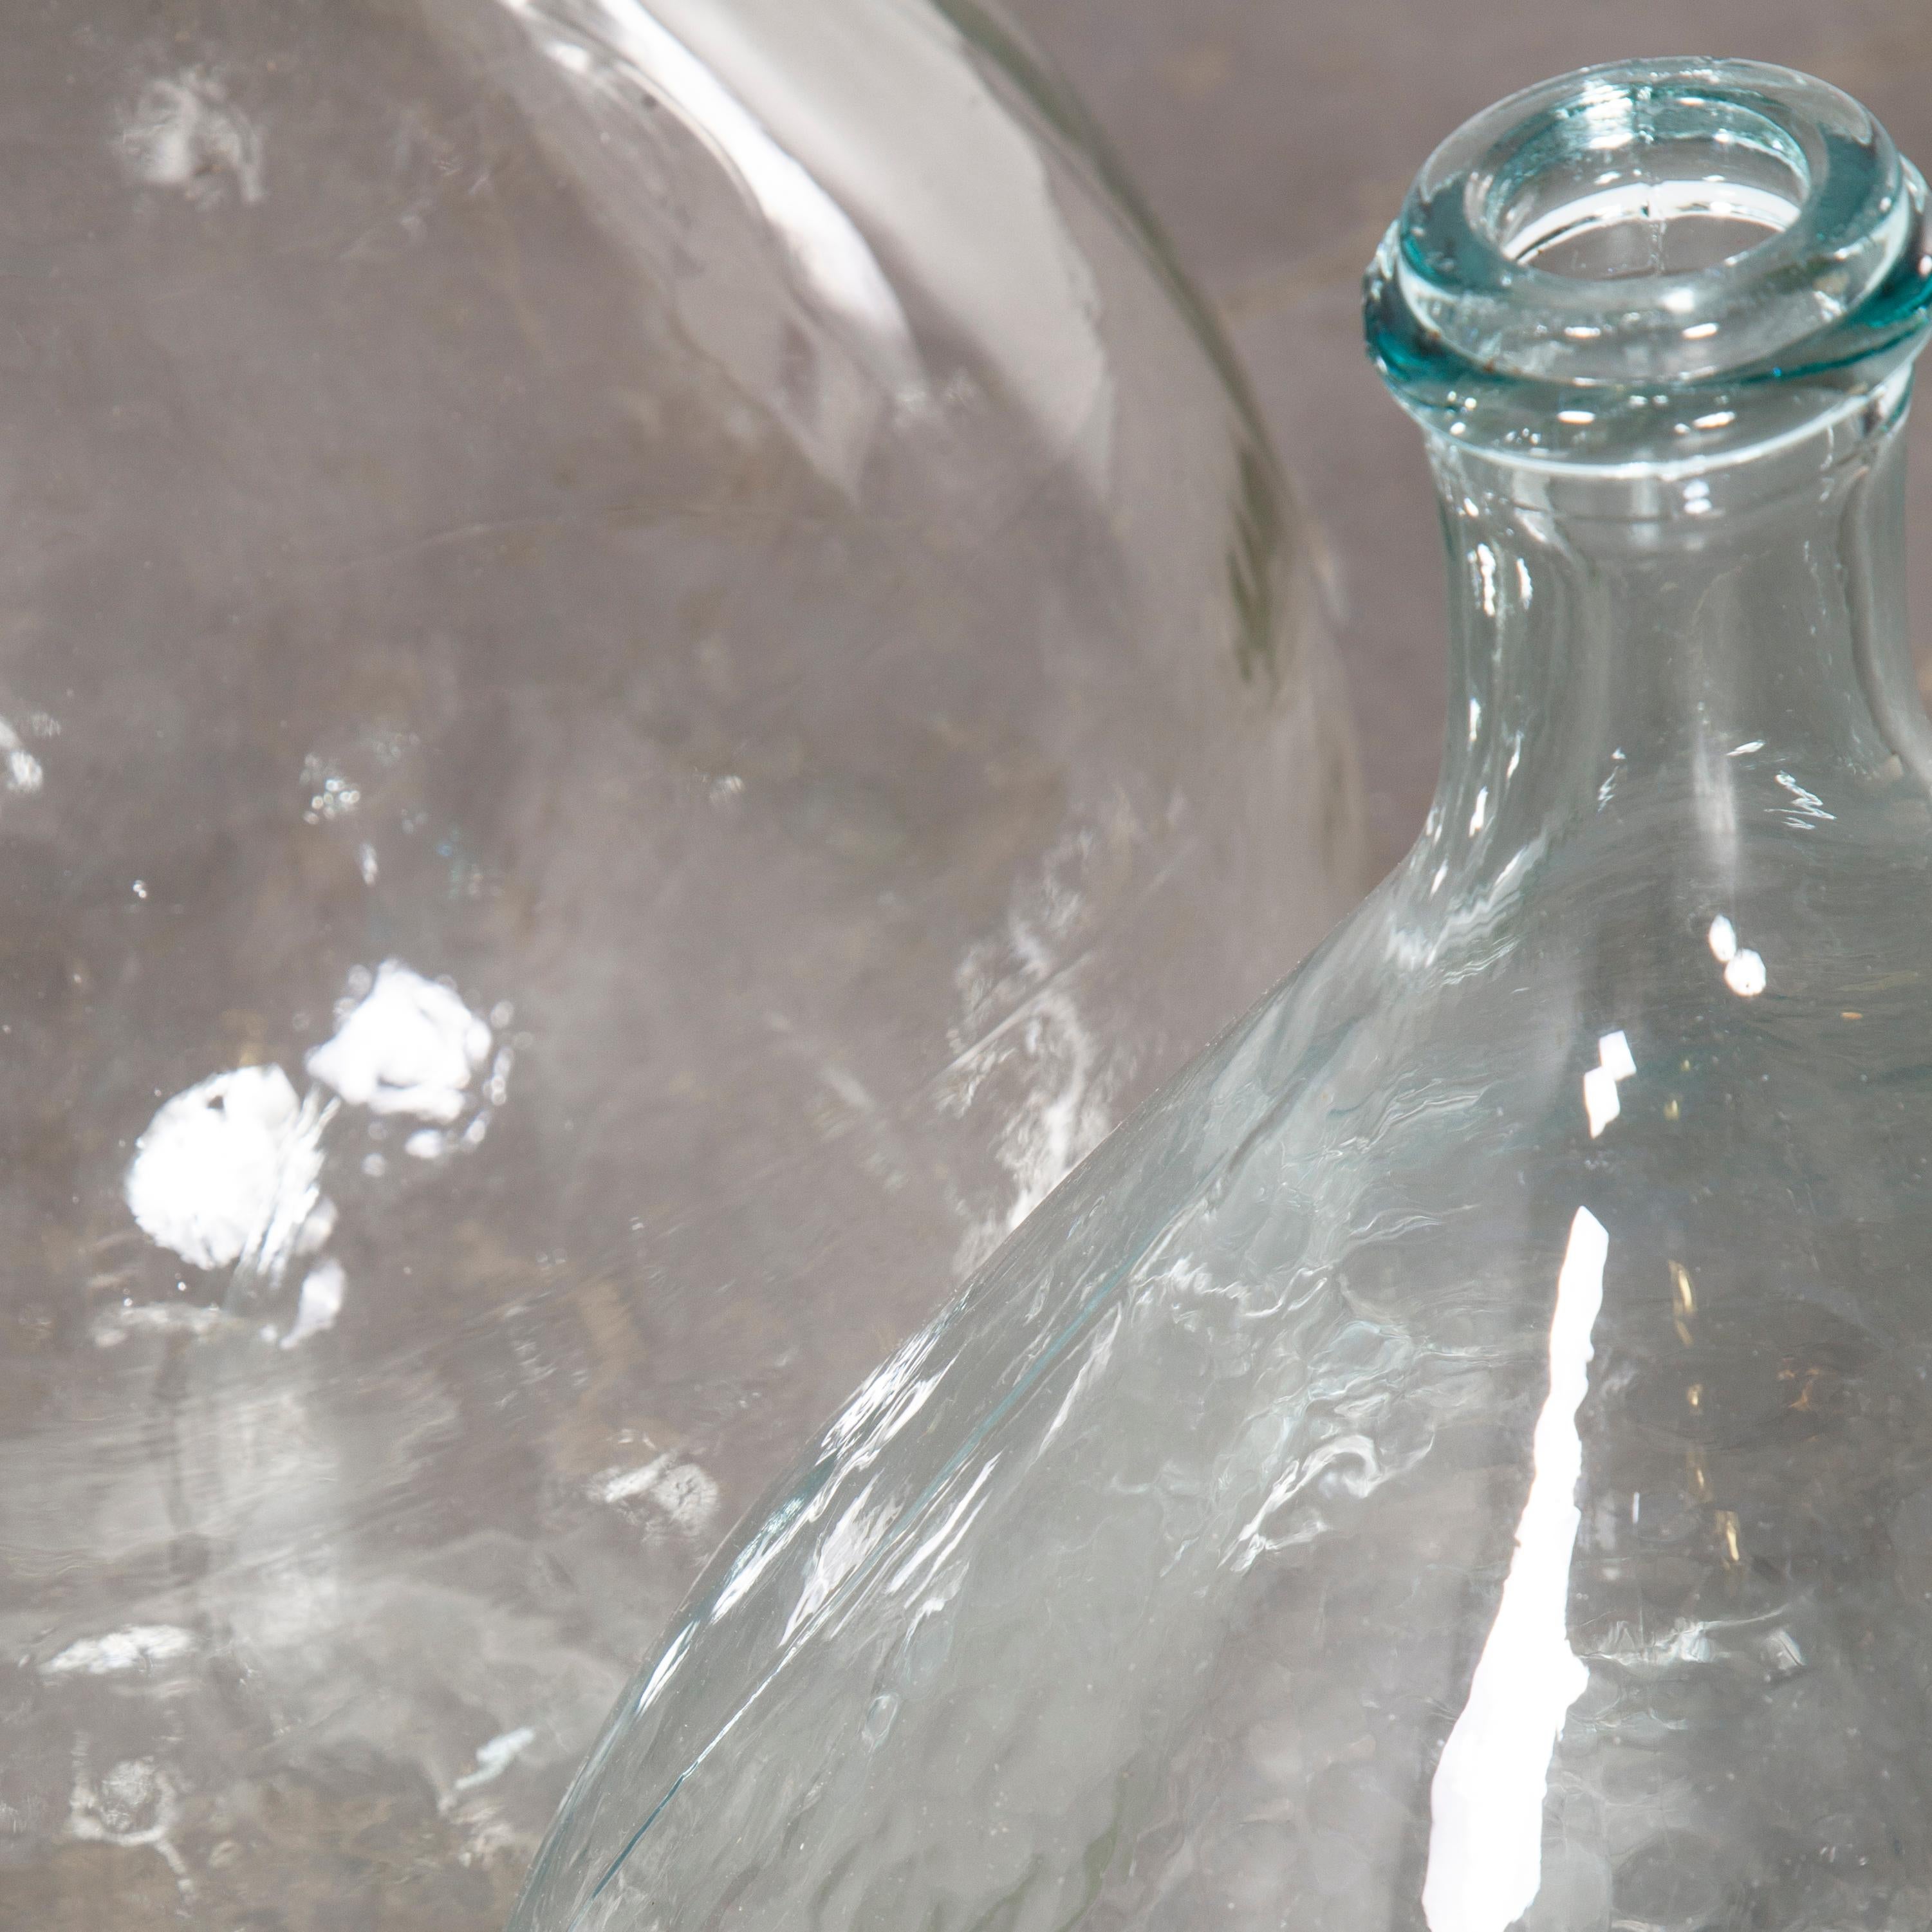 Vintage French glass demijohn, pair of demijohn (Model 957.13)

Vintage French glass demijohns. Pair of mouthblown glass demijohns used as a traditional containers mainly for wine storage and transport. Our demijohns have been carefully cleaned.